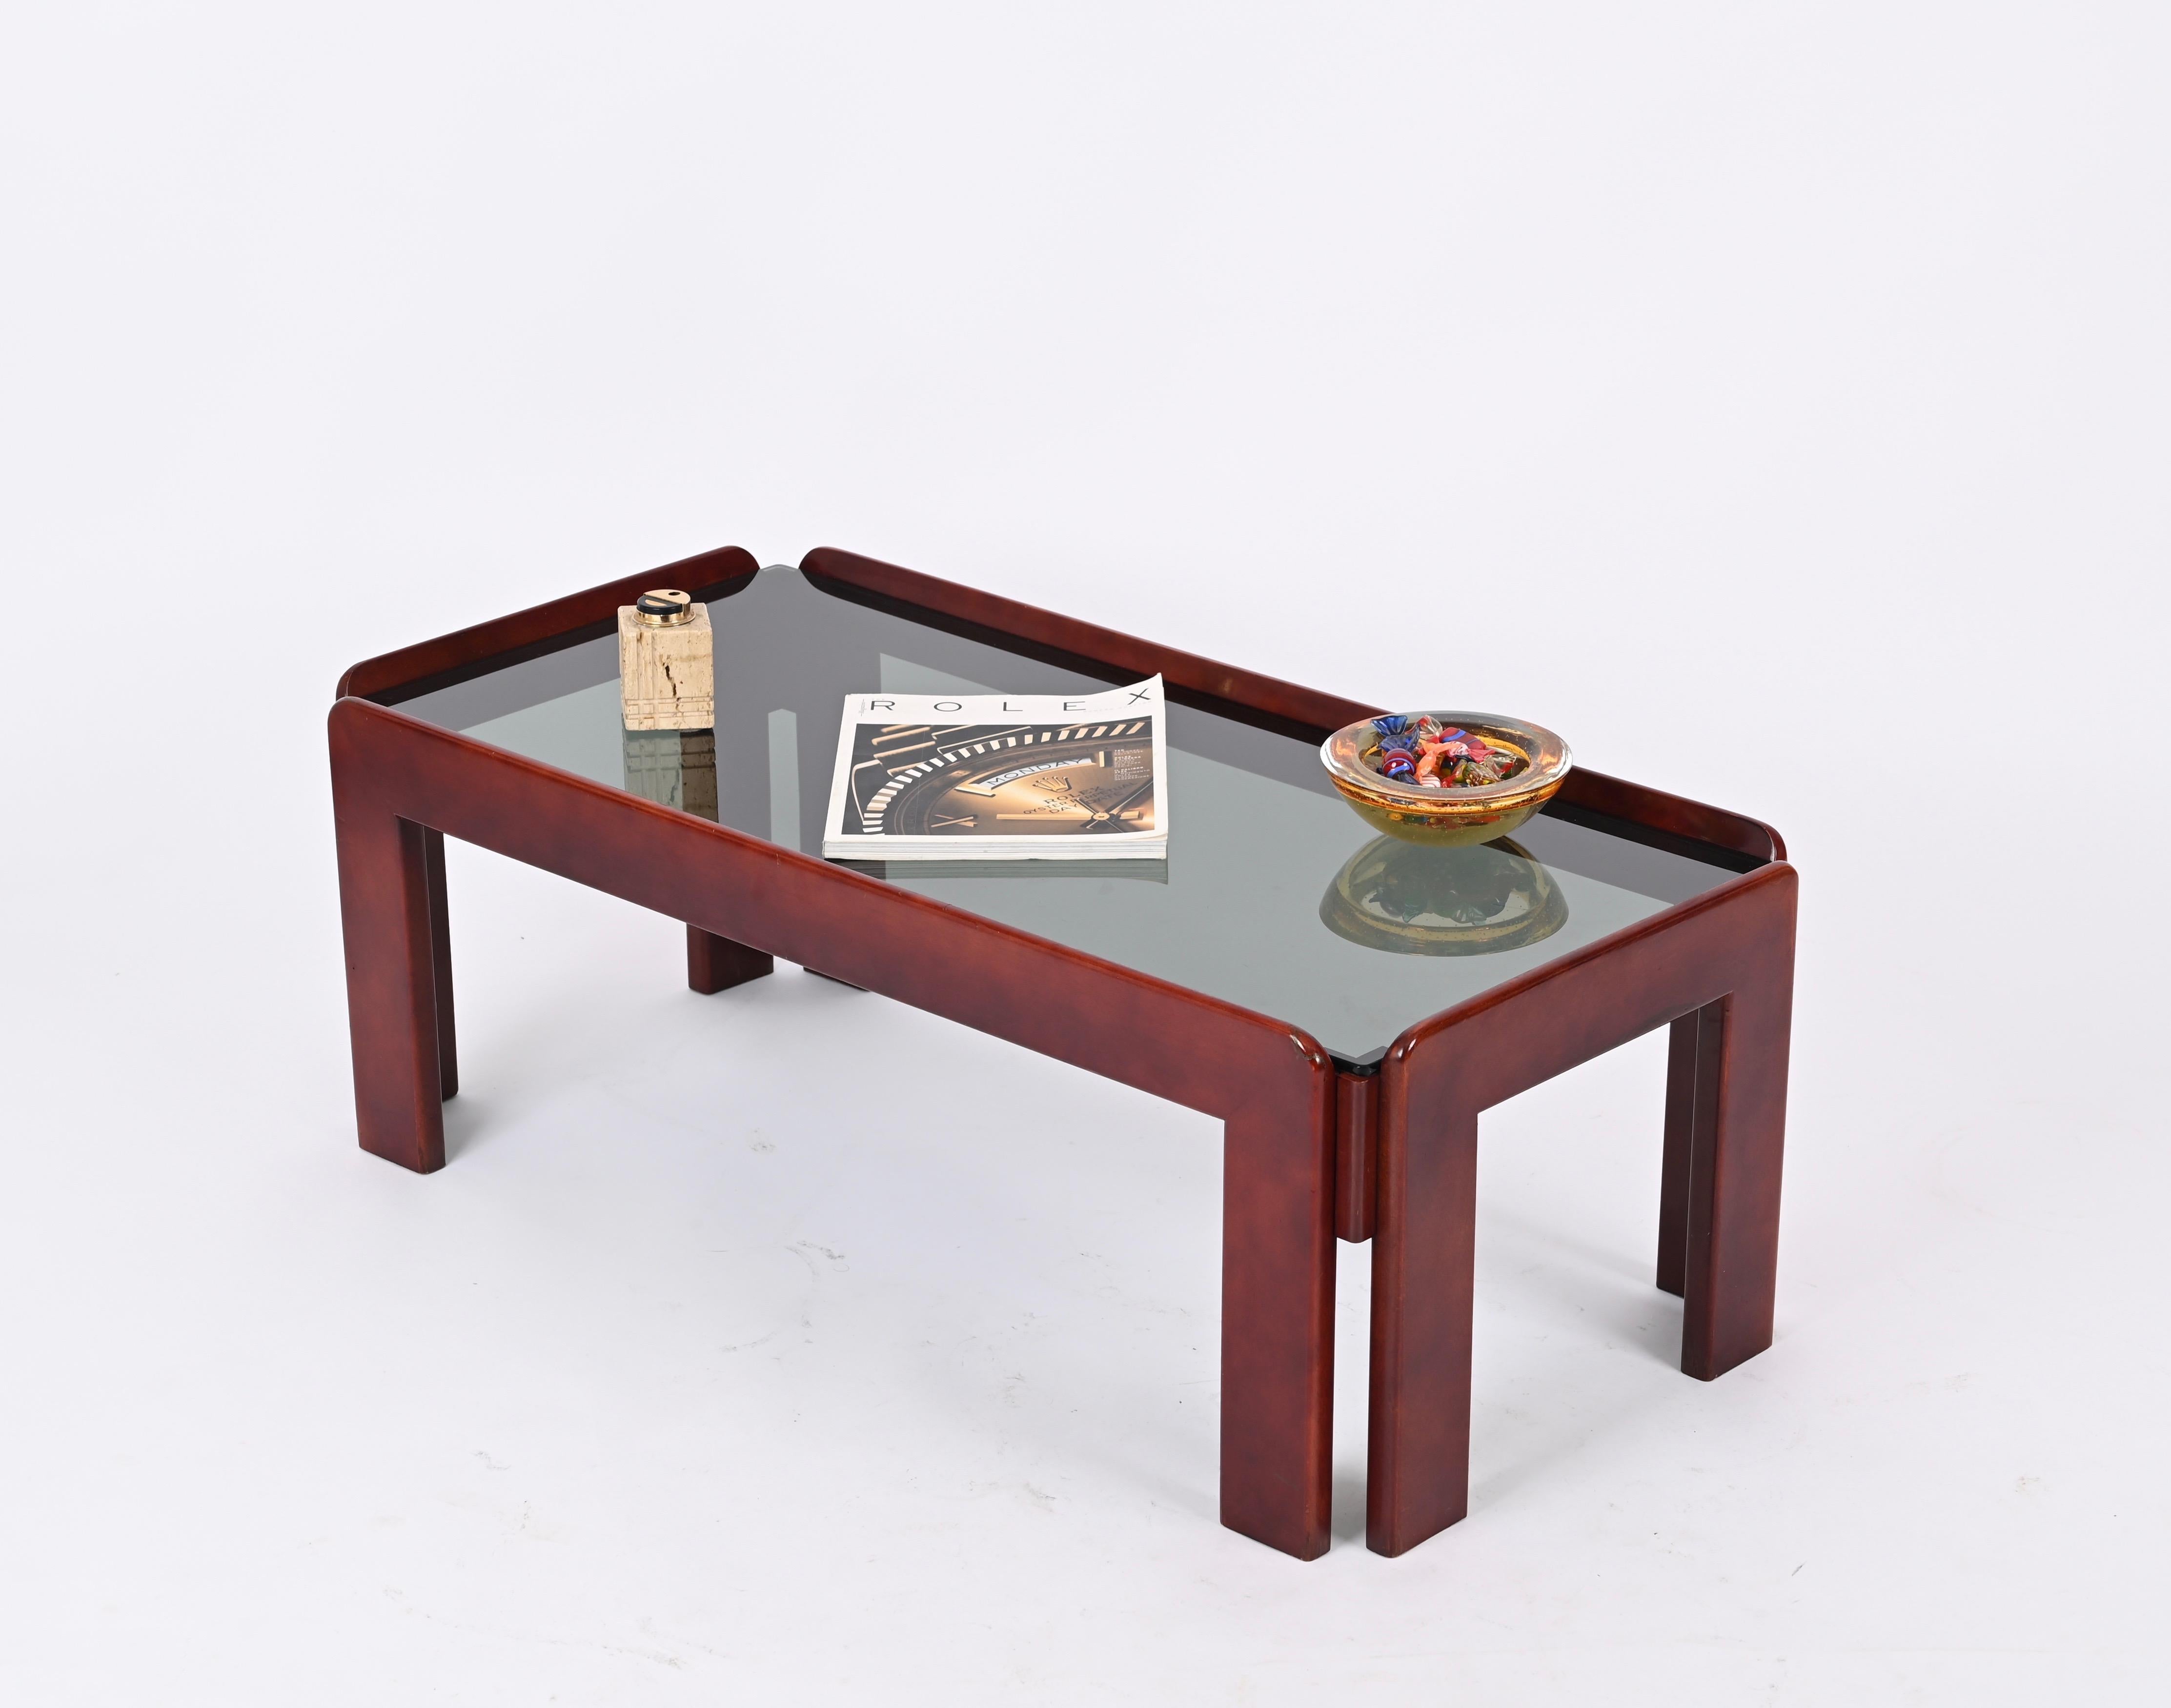 Afra & Tobia Scarpa Mid-Century Walnut Coffee Table for Cassina, Italy 1960s For Sale 4